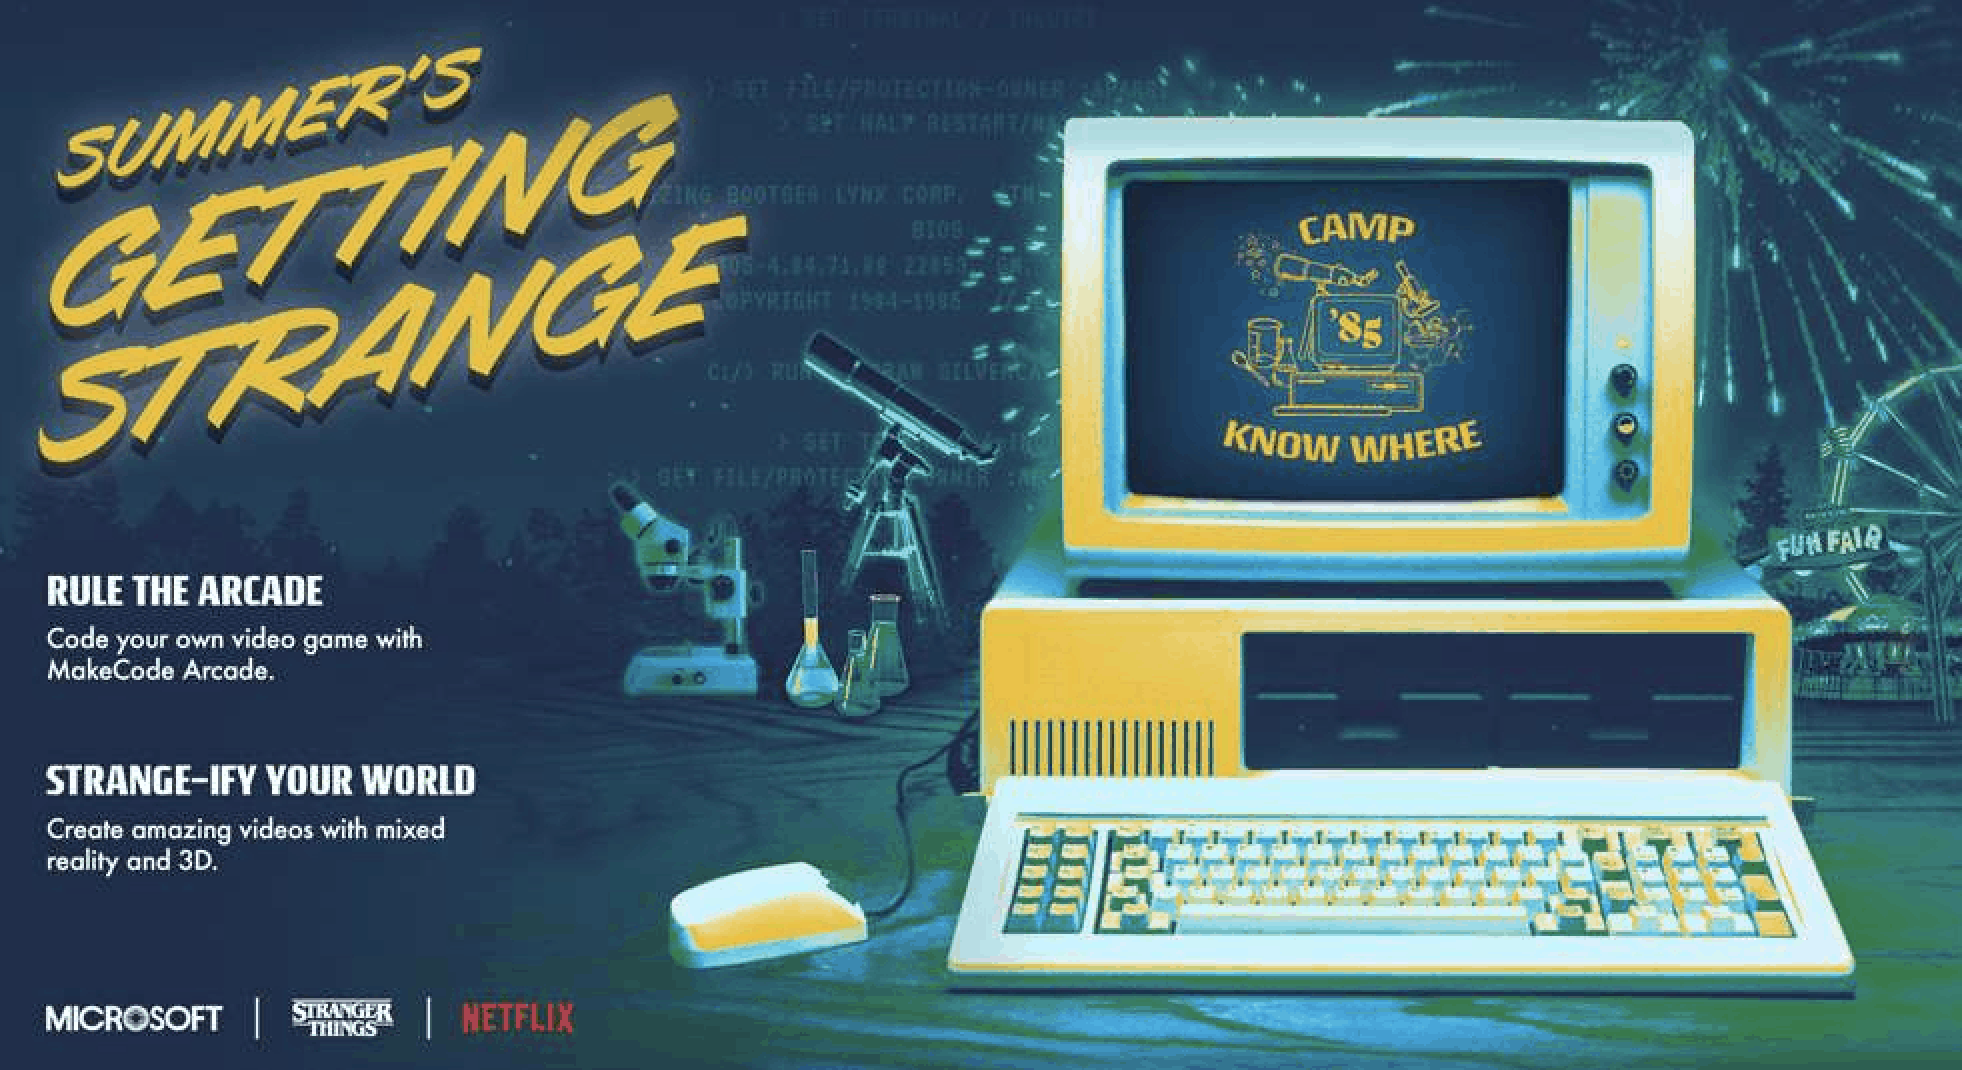 Microsoft launches Stranger Things-inspired Windows 1.11 app, Windows theme, and STEM camps in the US - OnMSFT.com - July 8, 2019